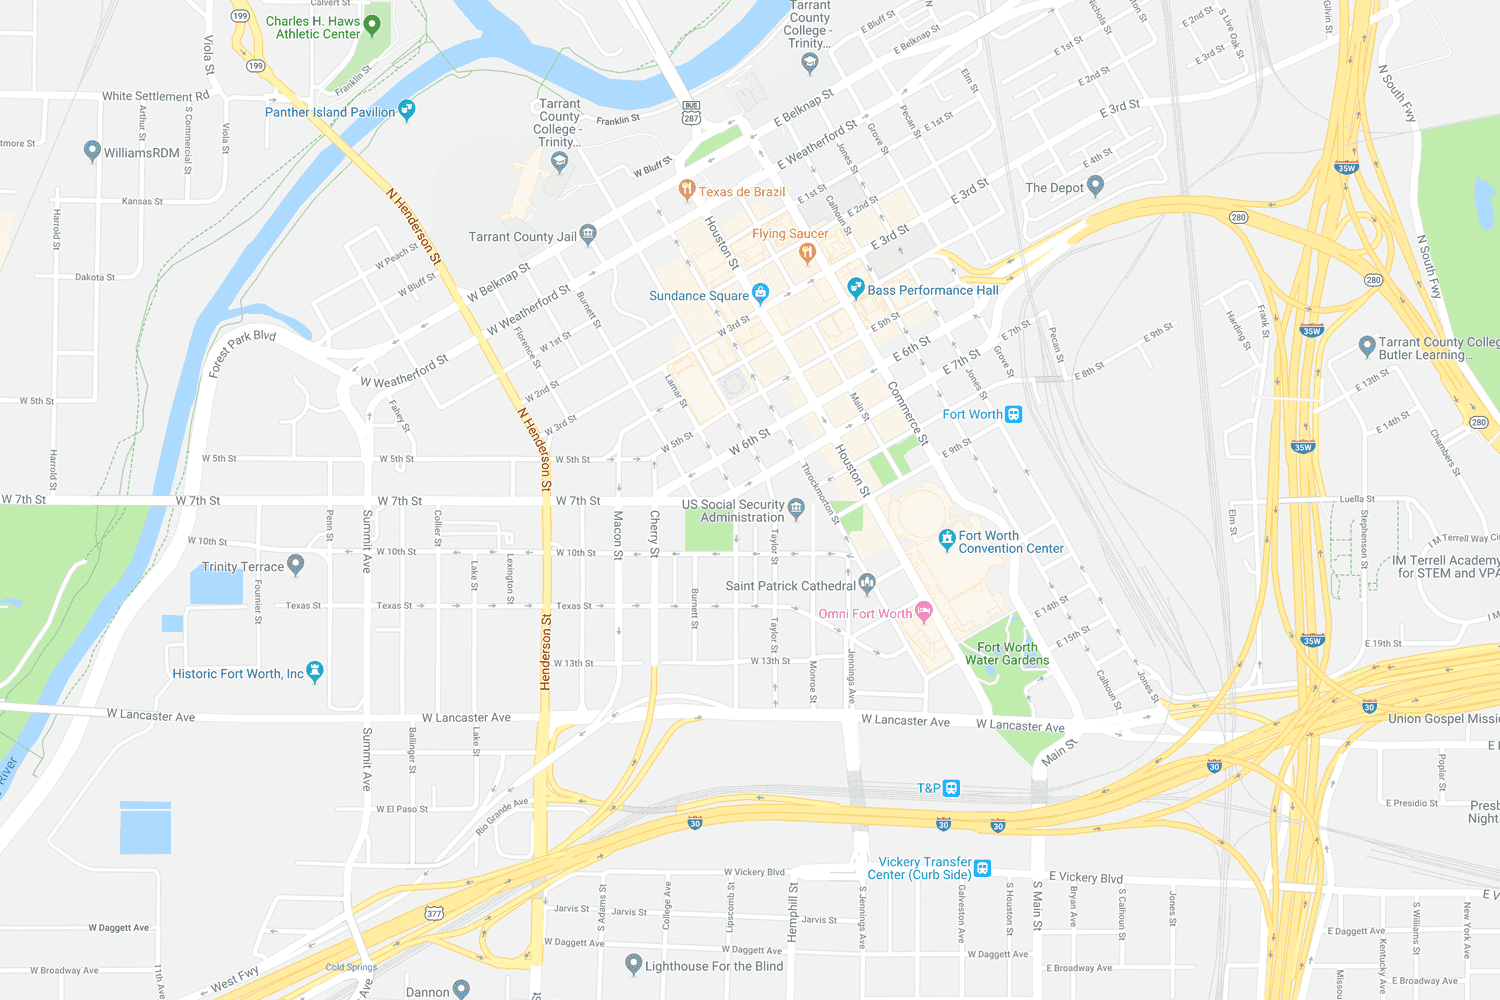 Map of Fort Worth location